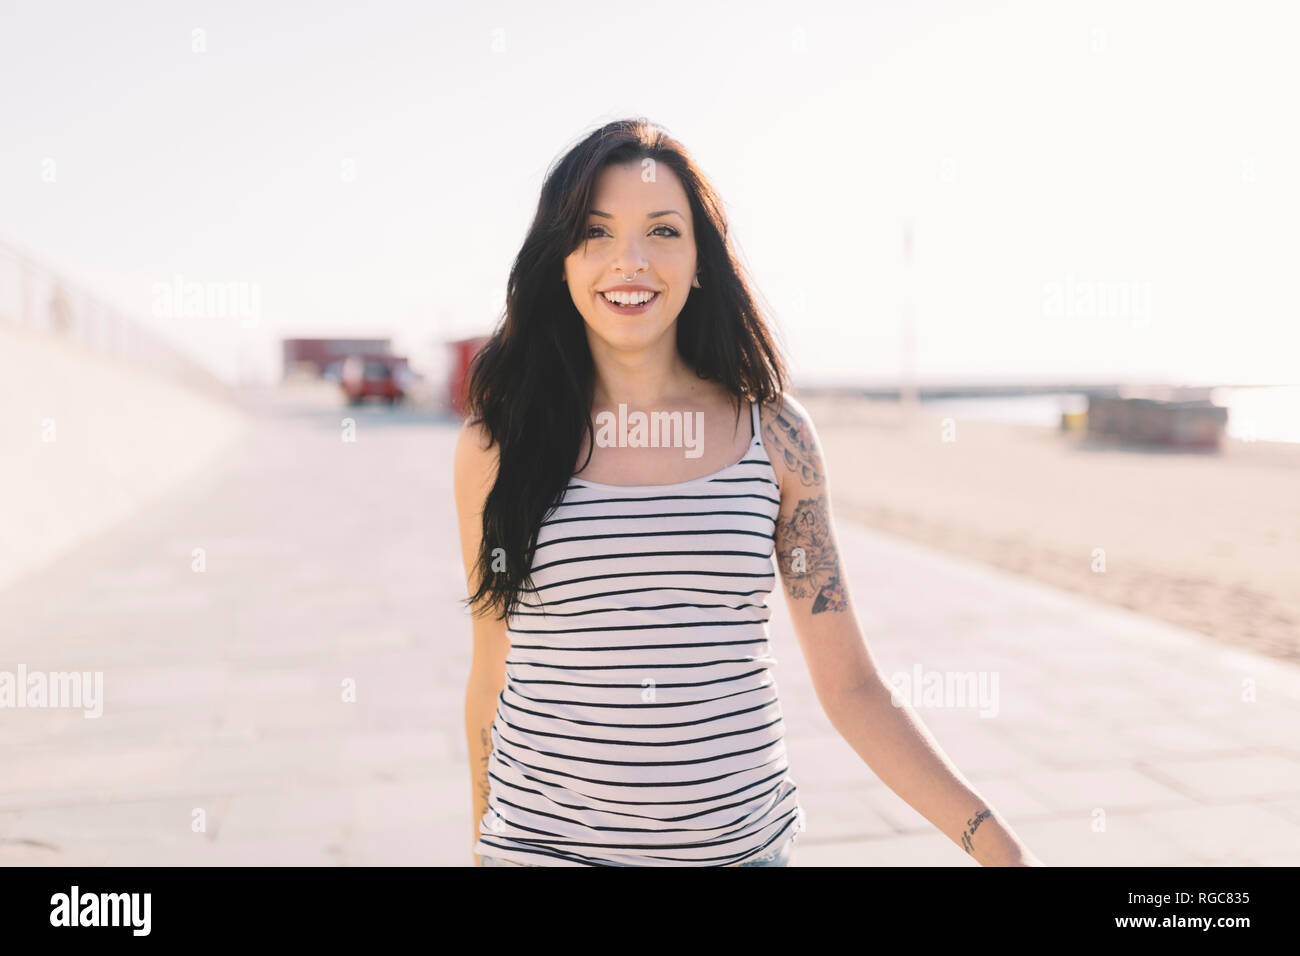 Portrait of smiling young woman with tattoo walking on beach promenade Stock Photo